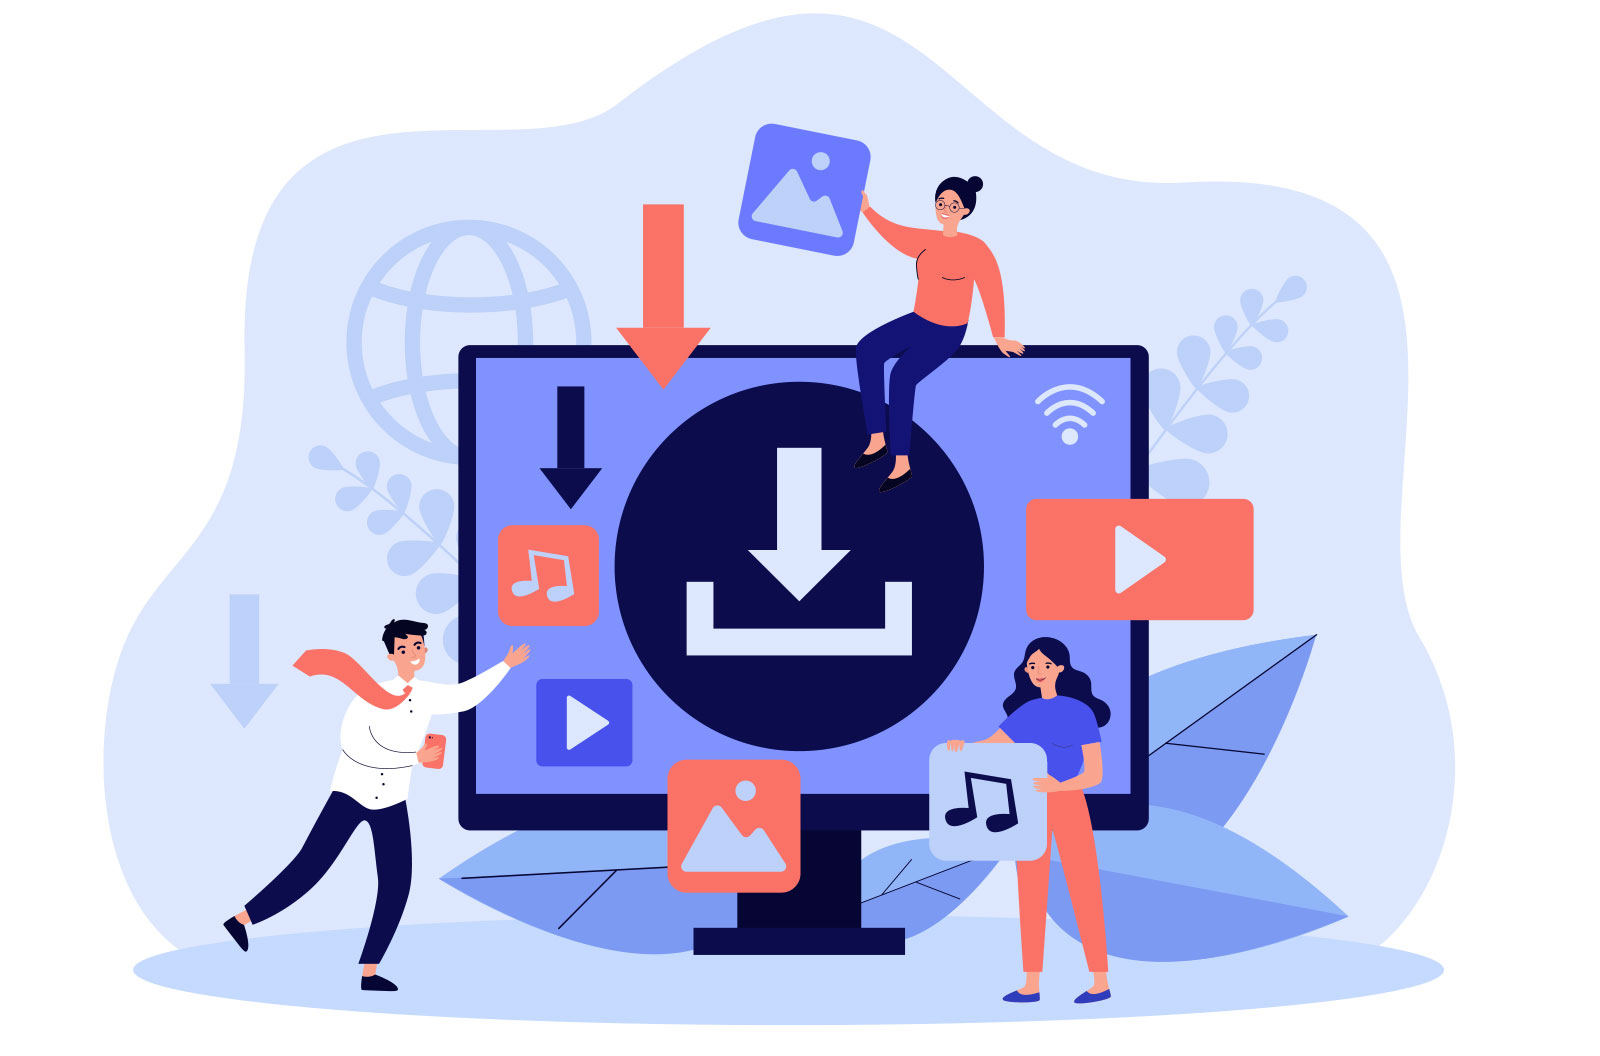 Multimedia content illustration with multiple people